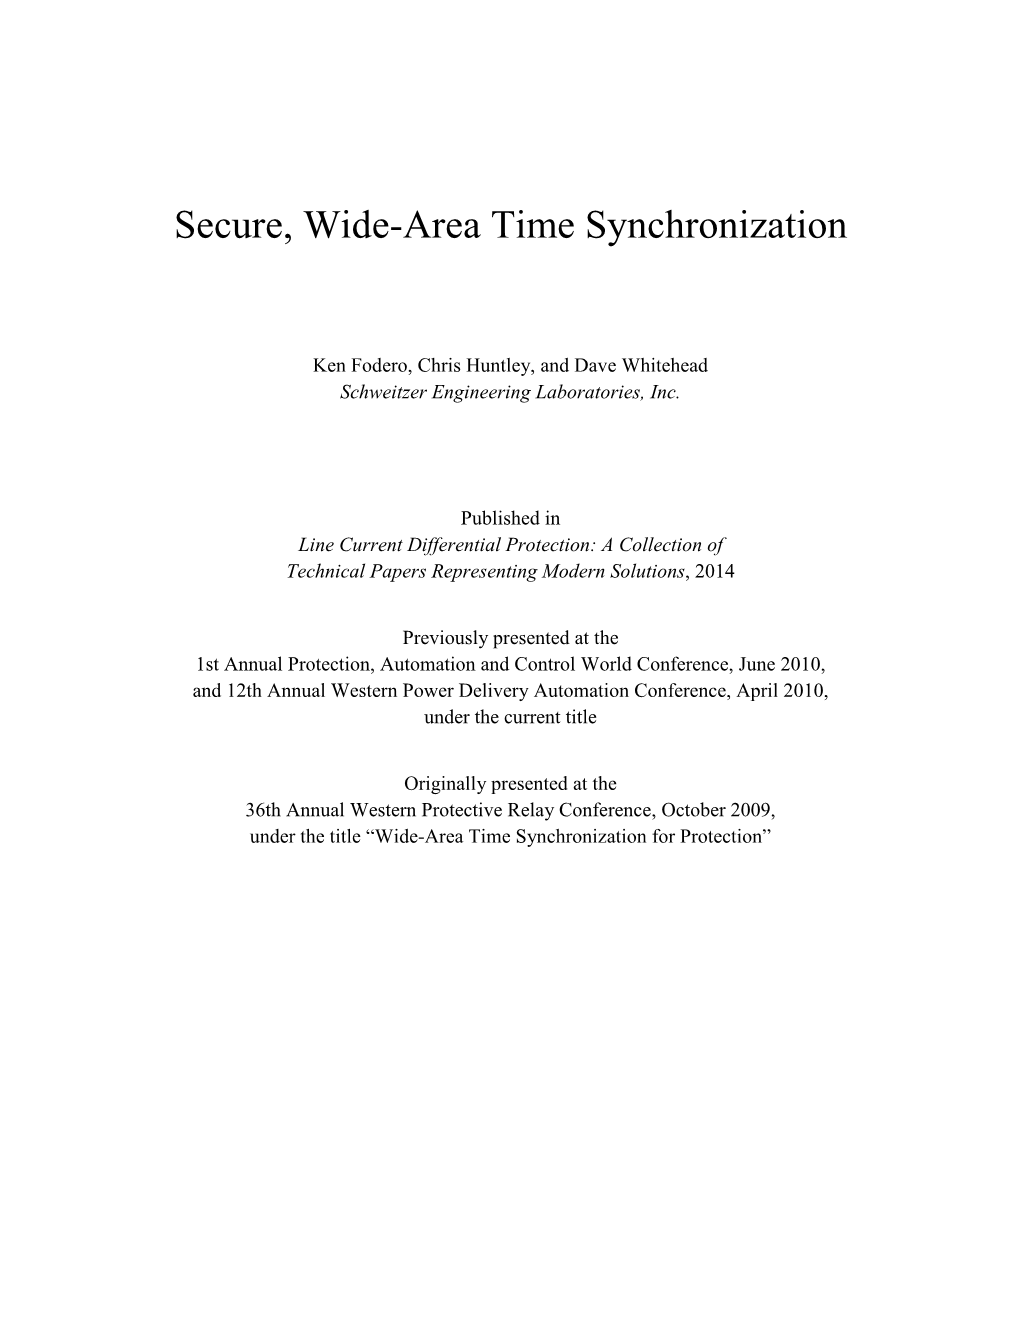 Secure, Wide-Area Time Synchronization